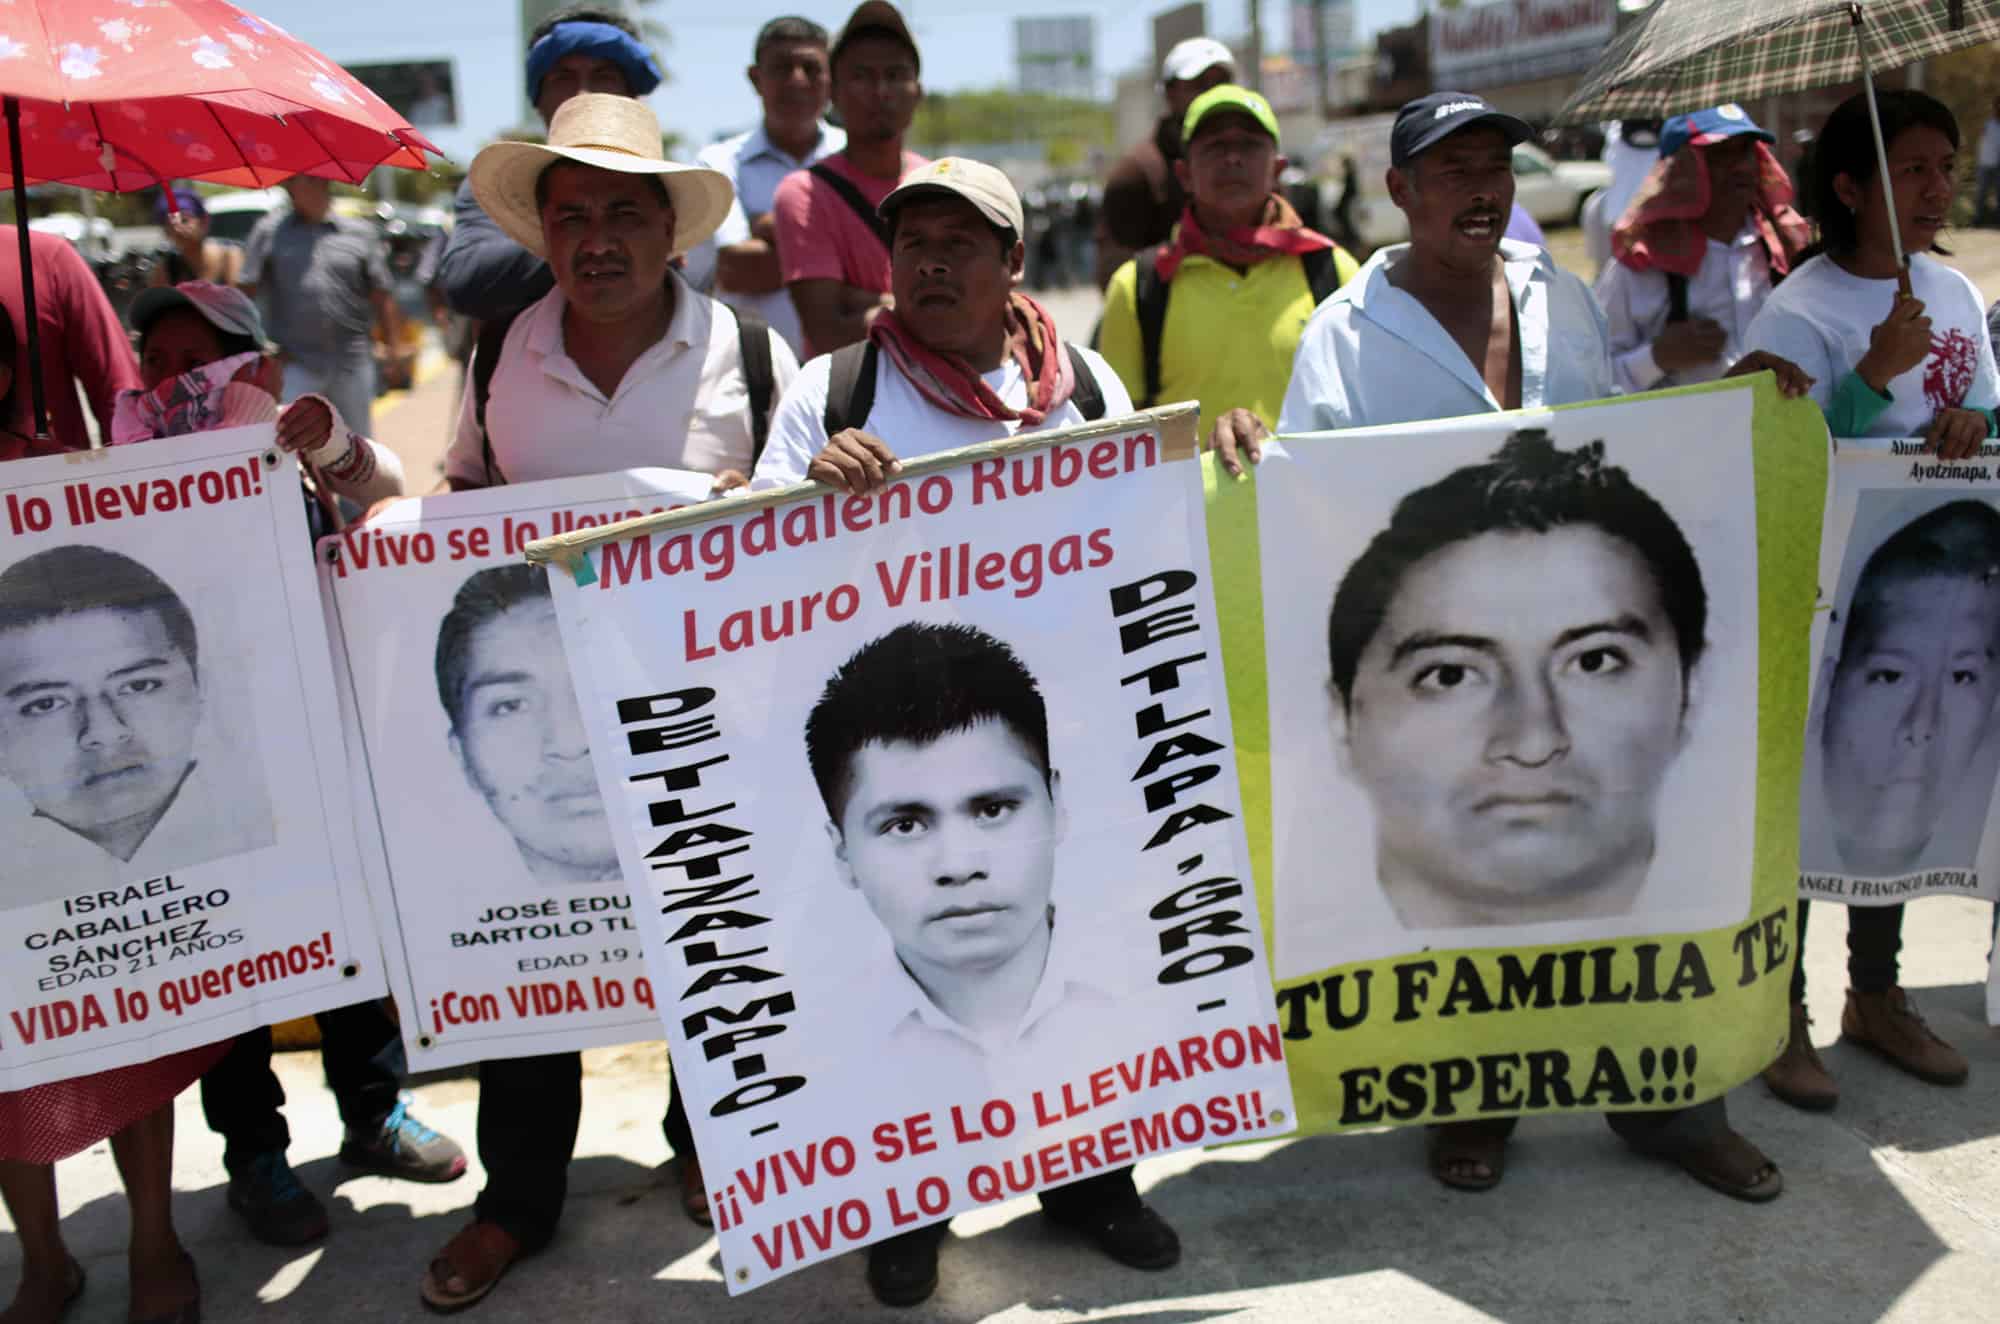 Parents and relatives of the 43 students from Ayotzinapa participate in a protest in Acapulco, Guerrero State, Mexico on March 24, 2015 demanding justice on their disappearance and on the death of teacher Claudio Castillo killed during a protest on February 24.